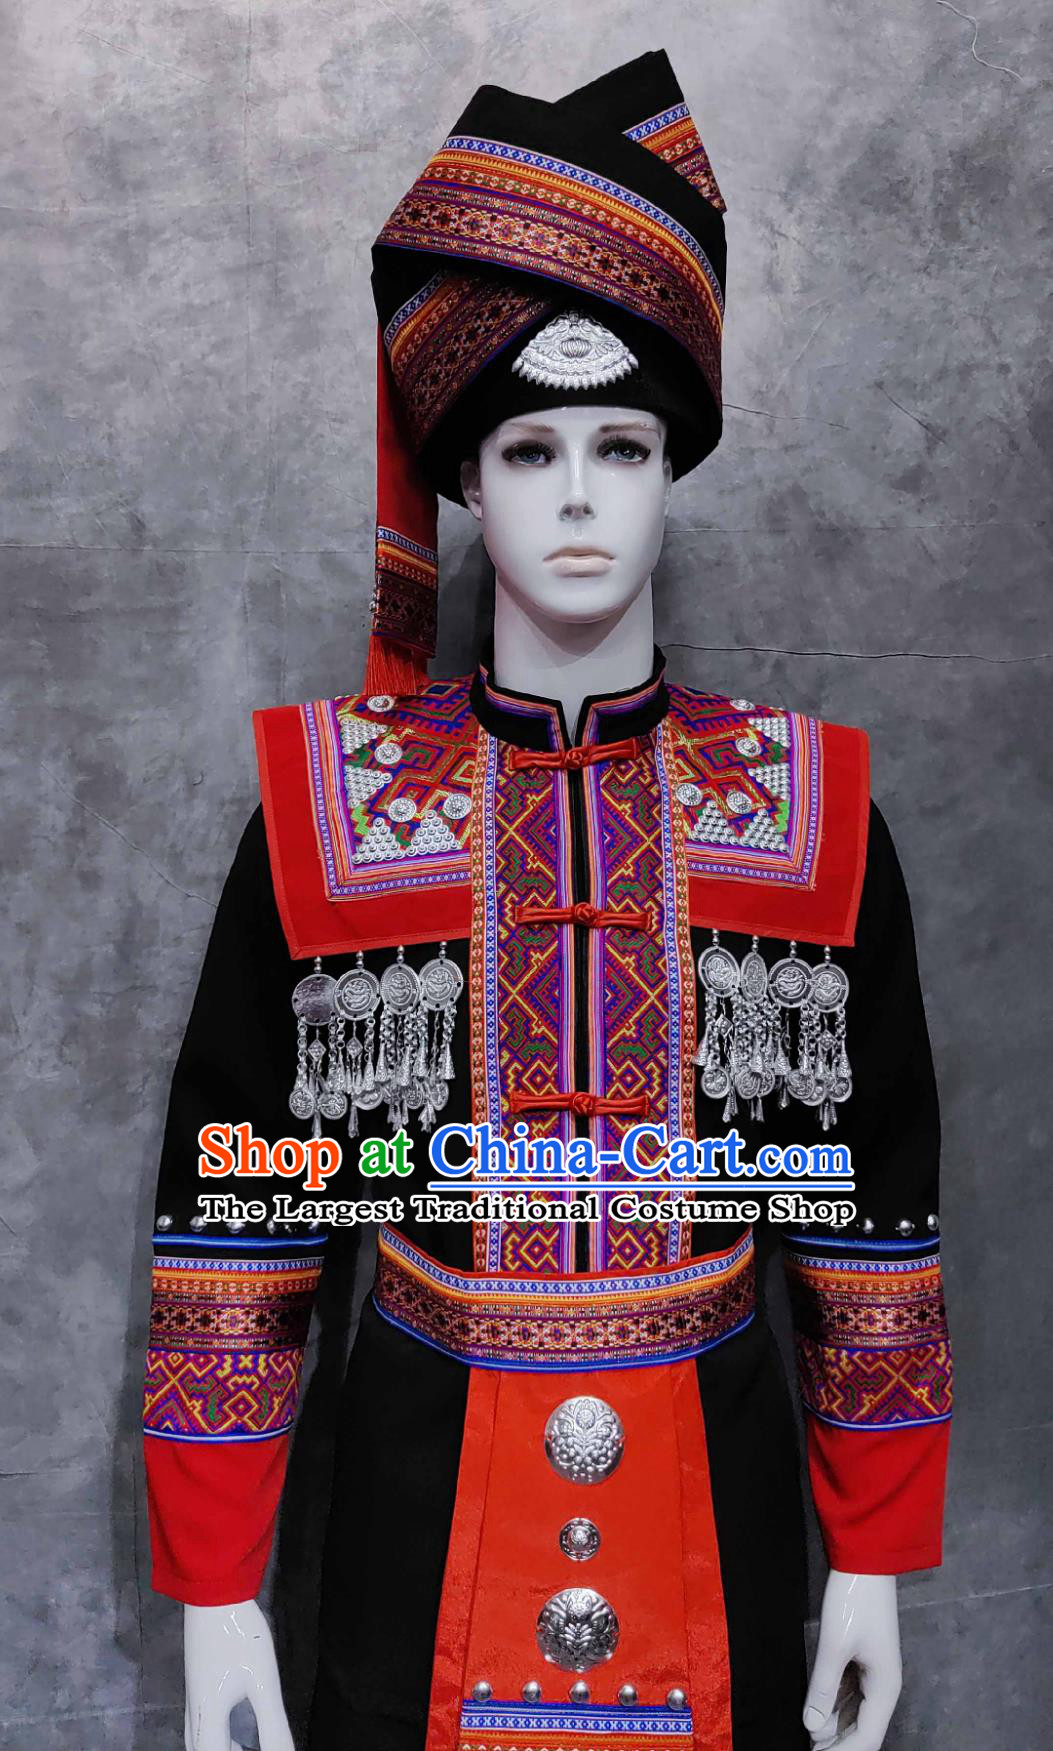 Chinese Guangxi National Minority Male Black Outfit Traditional March rd Festival Costume China Zhuang Ethnic Folk Dance Clothing